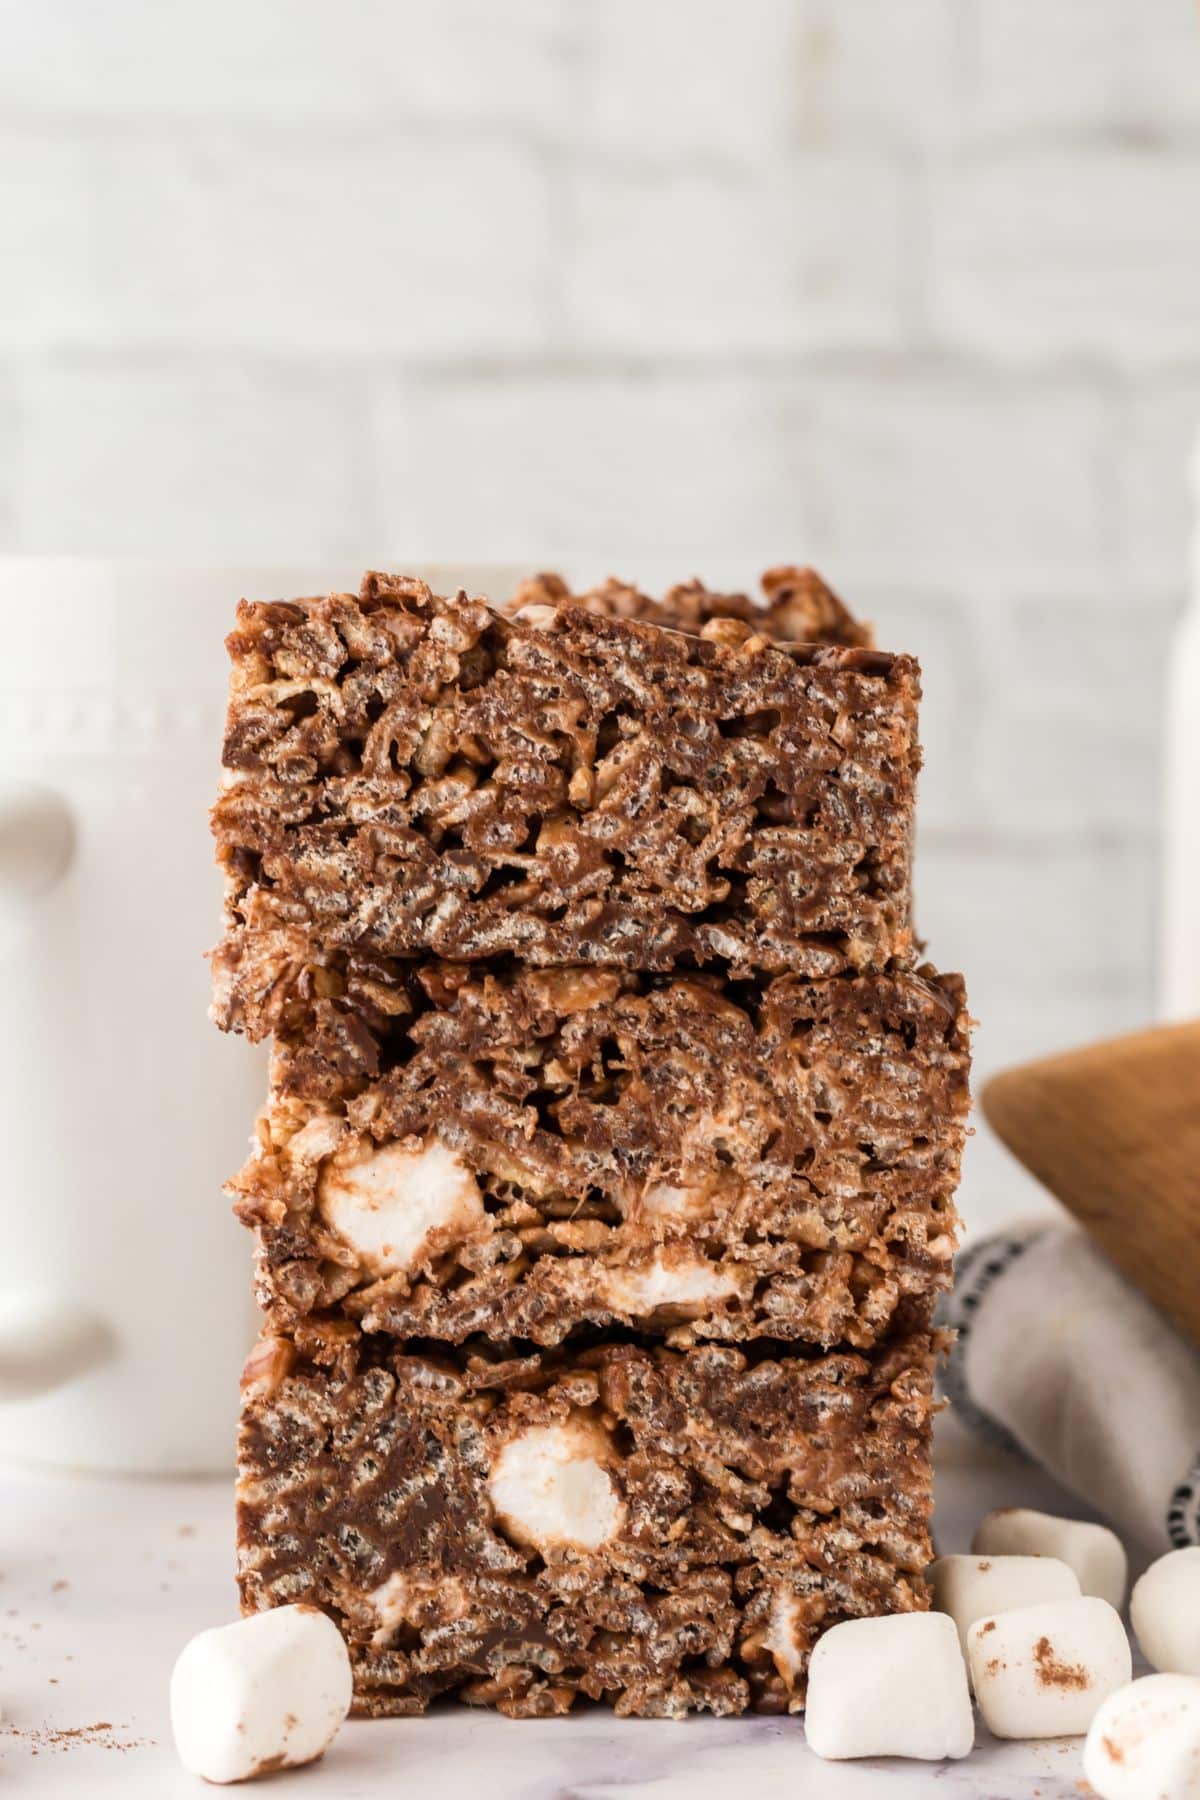 A stack of chocolate rice krispies squares with marshmallows and a cup of coffee in the background